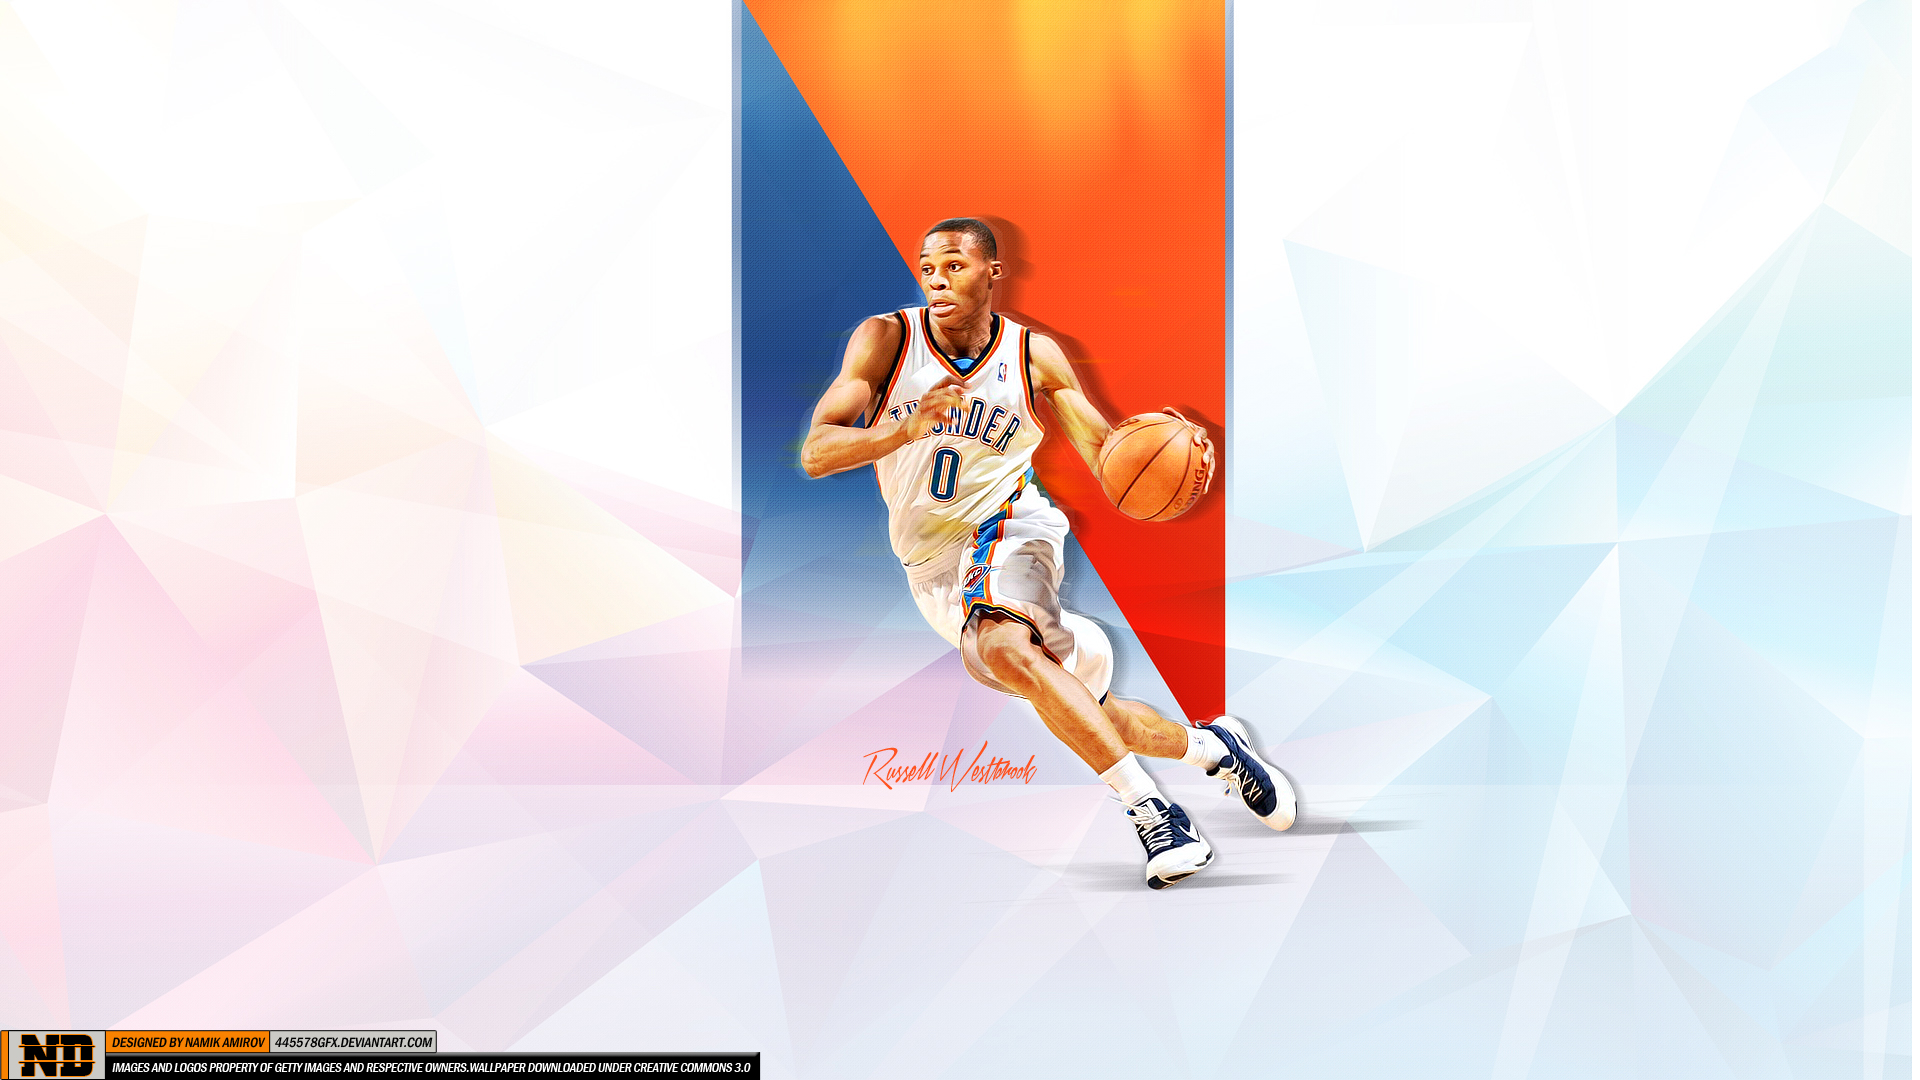 Free download NBA on Westbrook wallpapers Russell westbrook wallpaper  736x736 for your Desktop Mobile  Tablet  Explore 41 Russell Westbrook  4k Wallpapers  Russell Westbrook Wallpaper 2015 Russell Westbrook Dunk  Wallpaper Russell Westbrook 